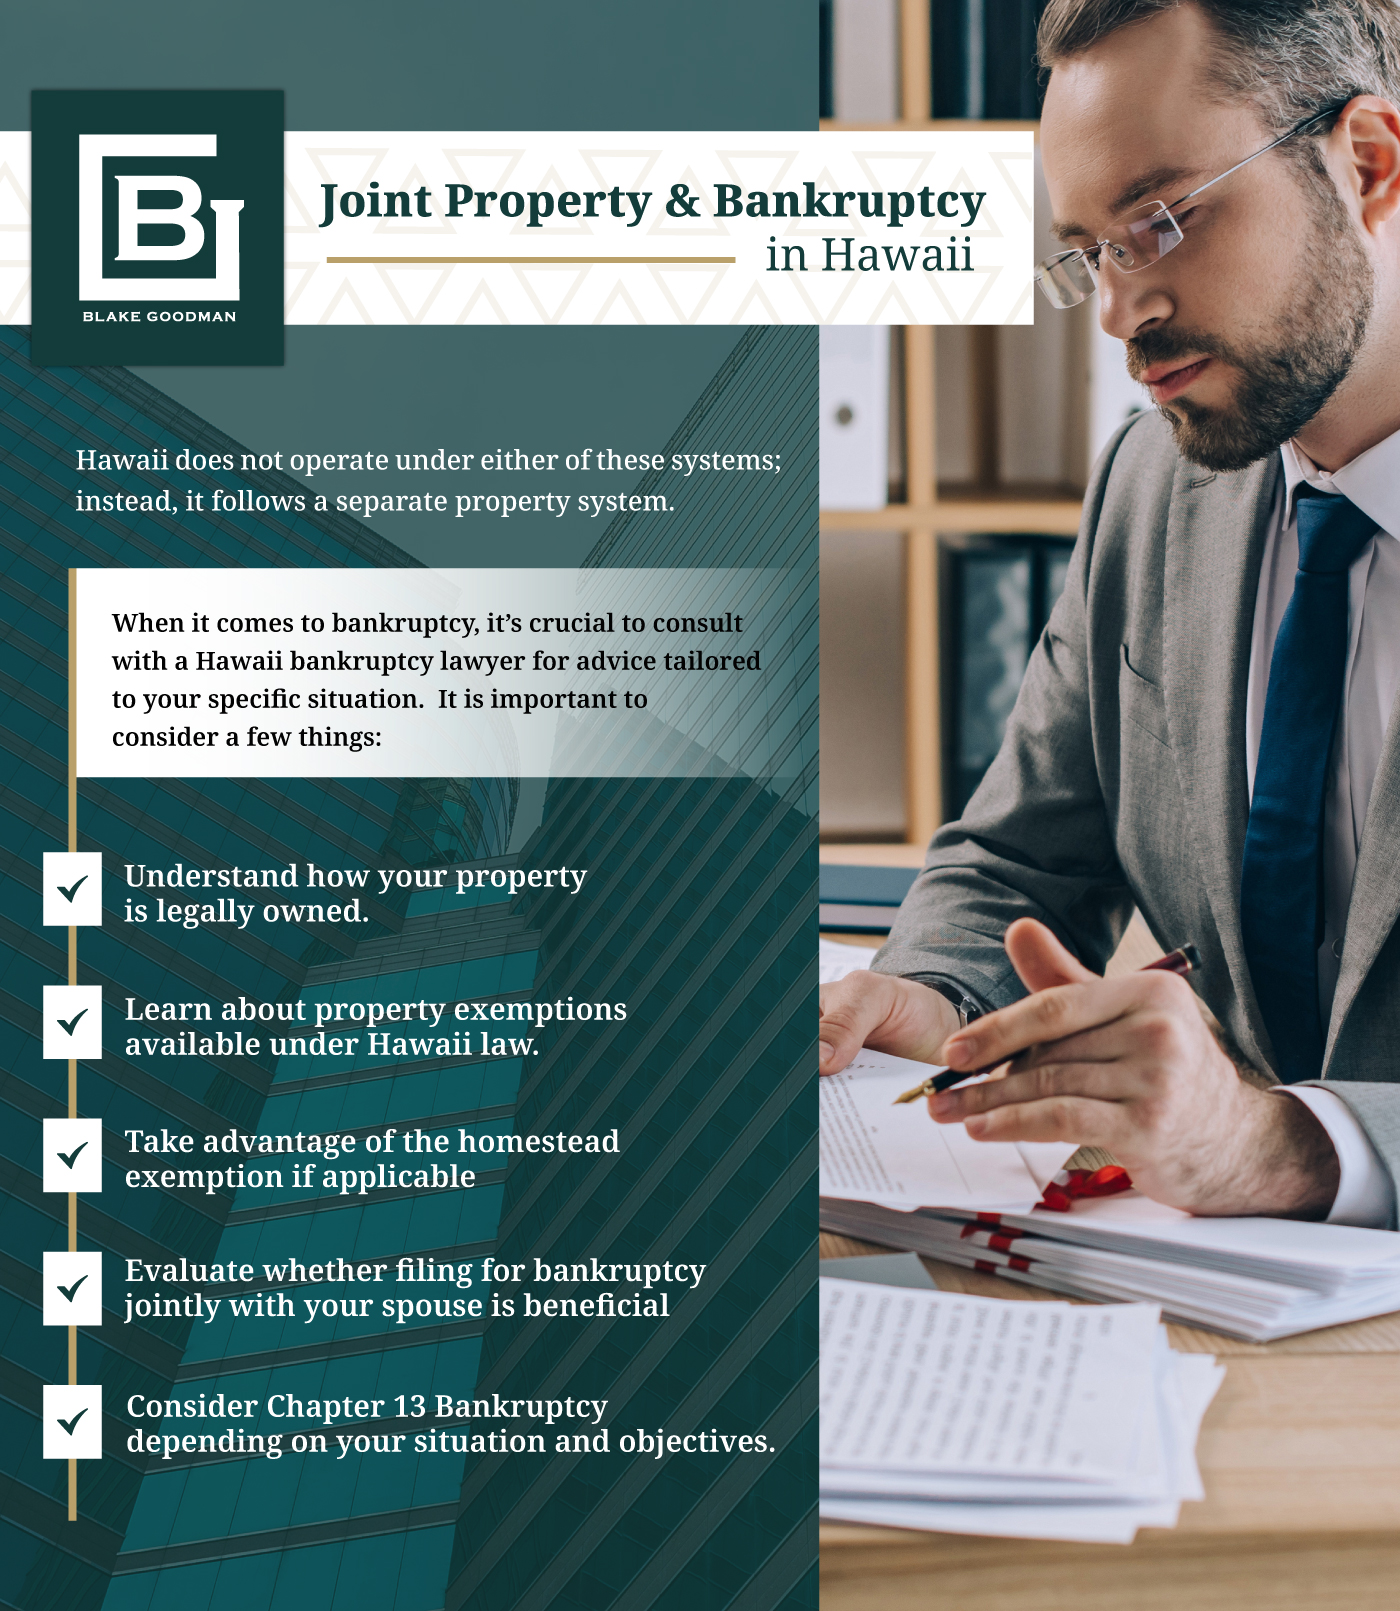 An infographic that explains about joint property & bankruptcy